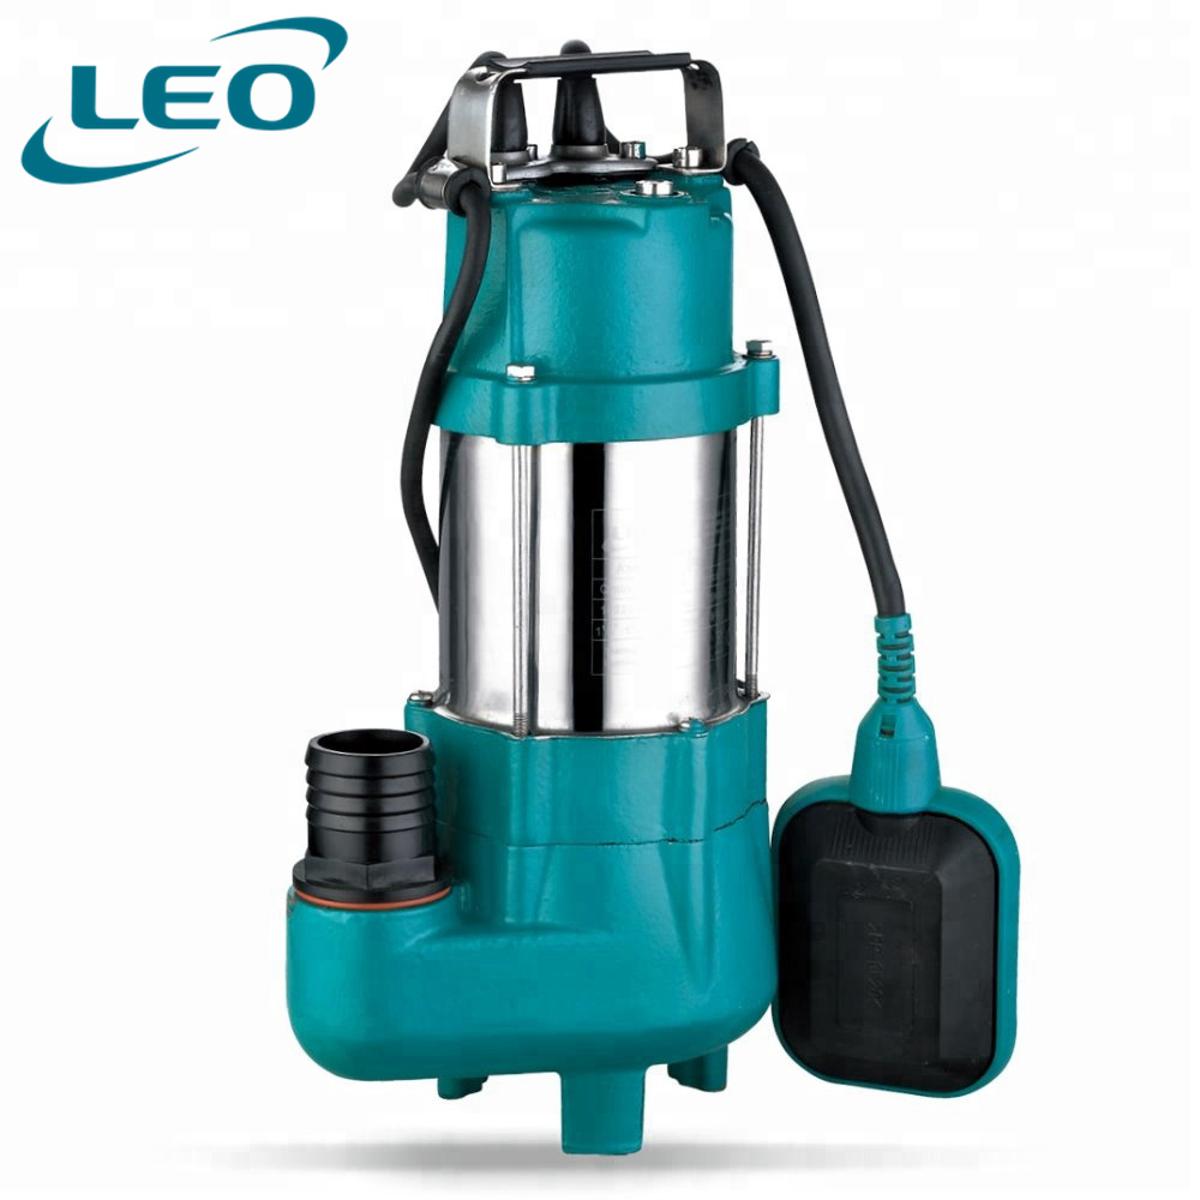 LEO - XSP-8-7-0.18I - 180 W - 0.25 HP - SMALL & EFFICENT Sewage Submersible Pump With FLOAT SWITCH FOR AUTOMATIC OPERATION - European STANDARD